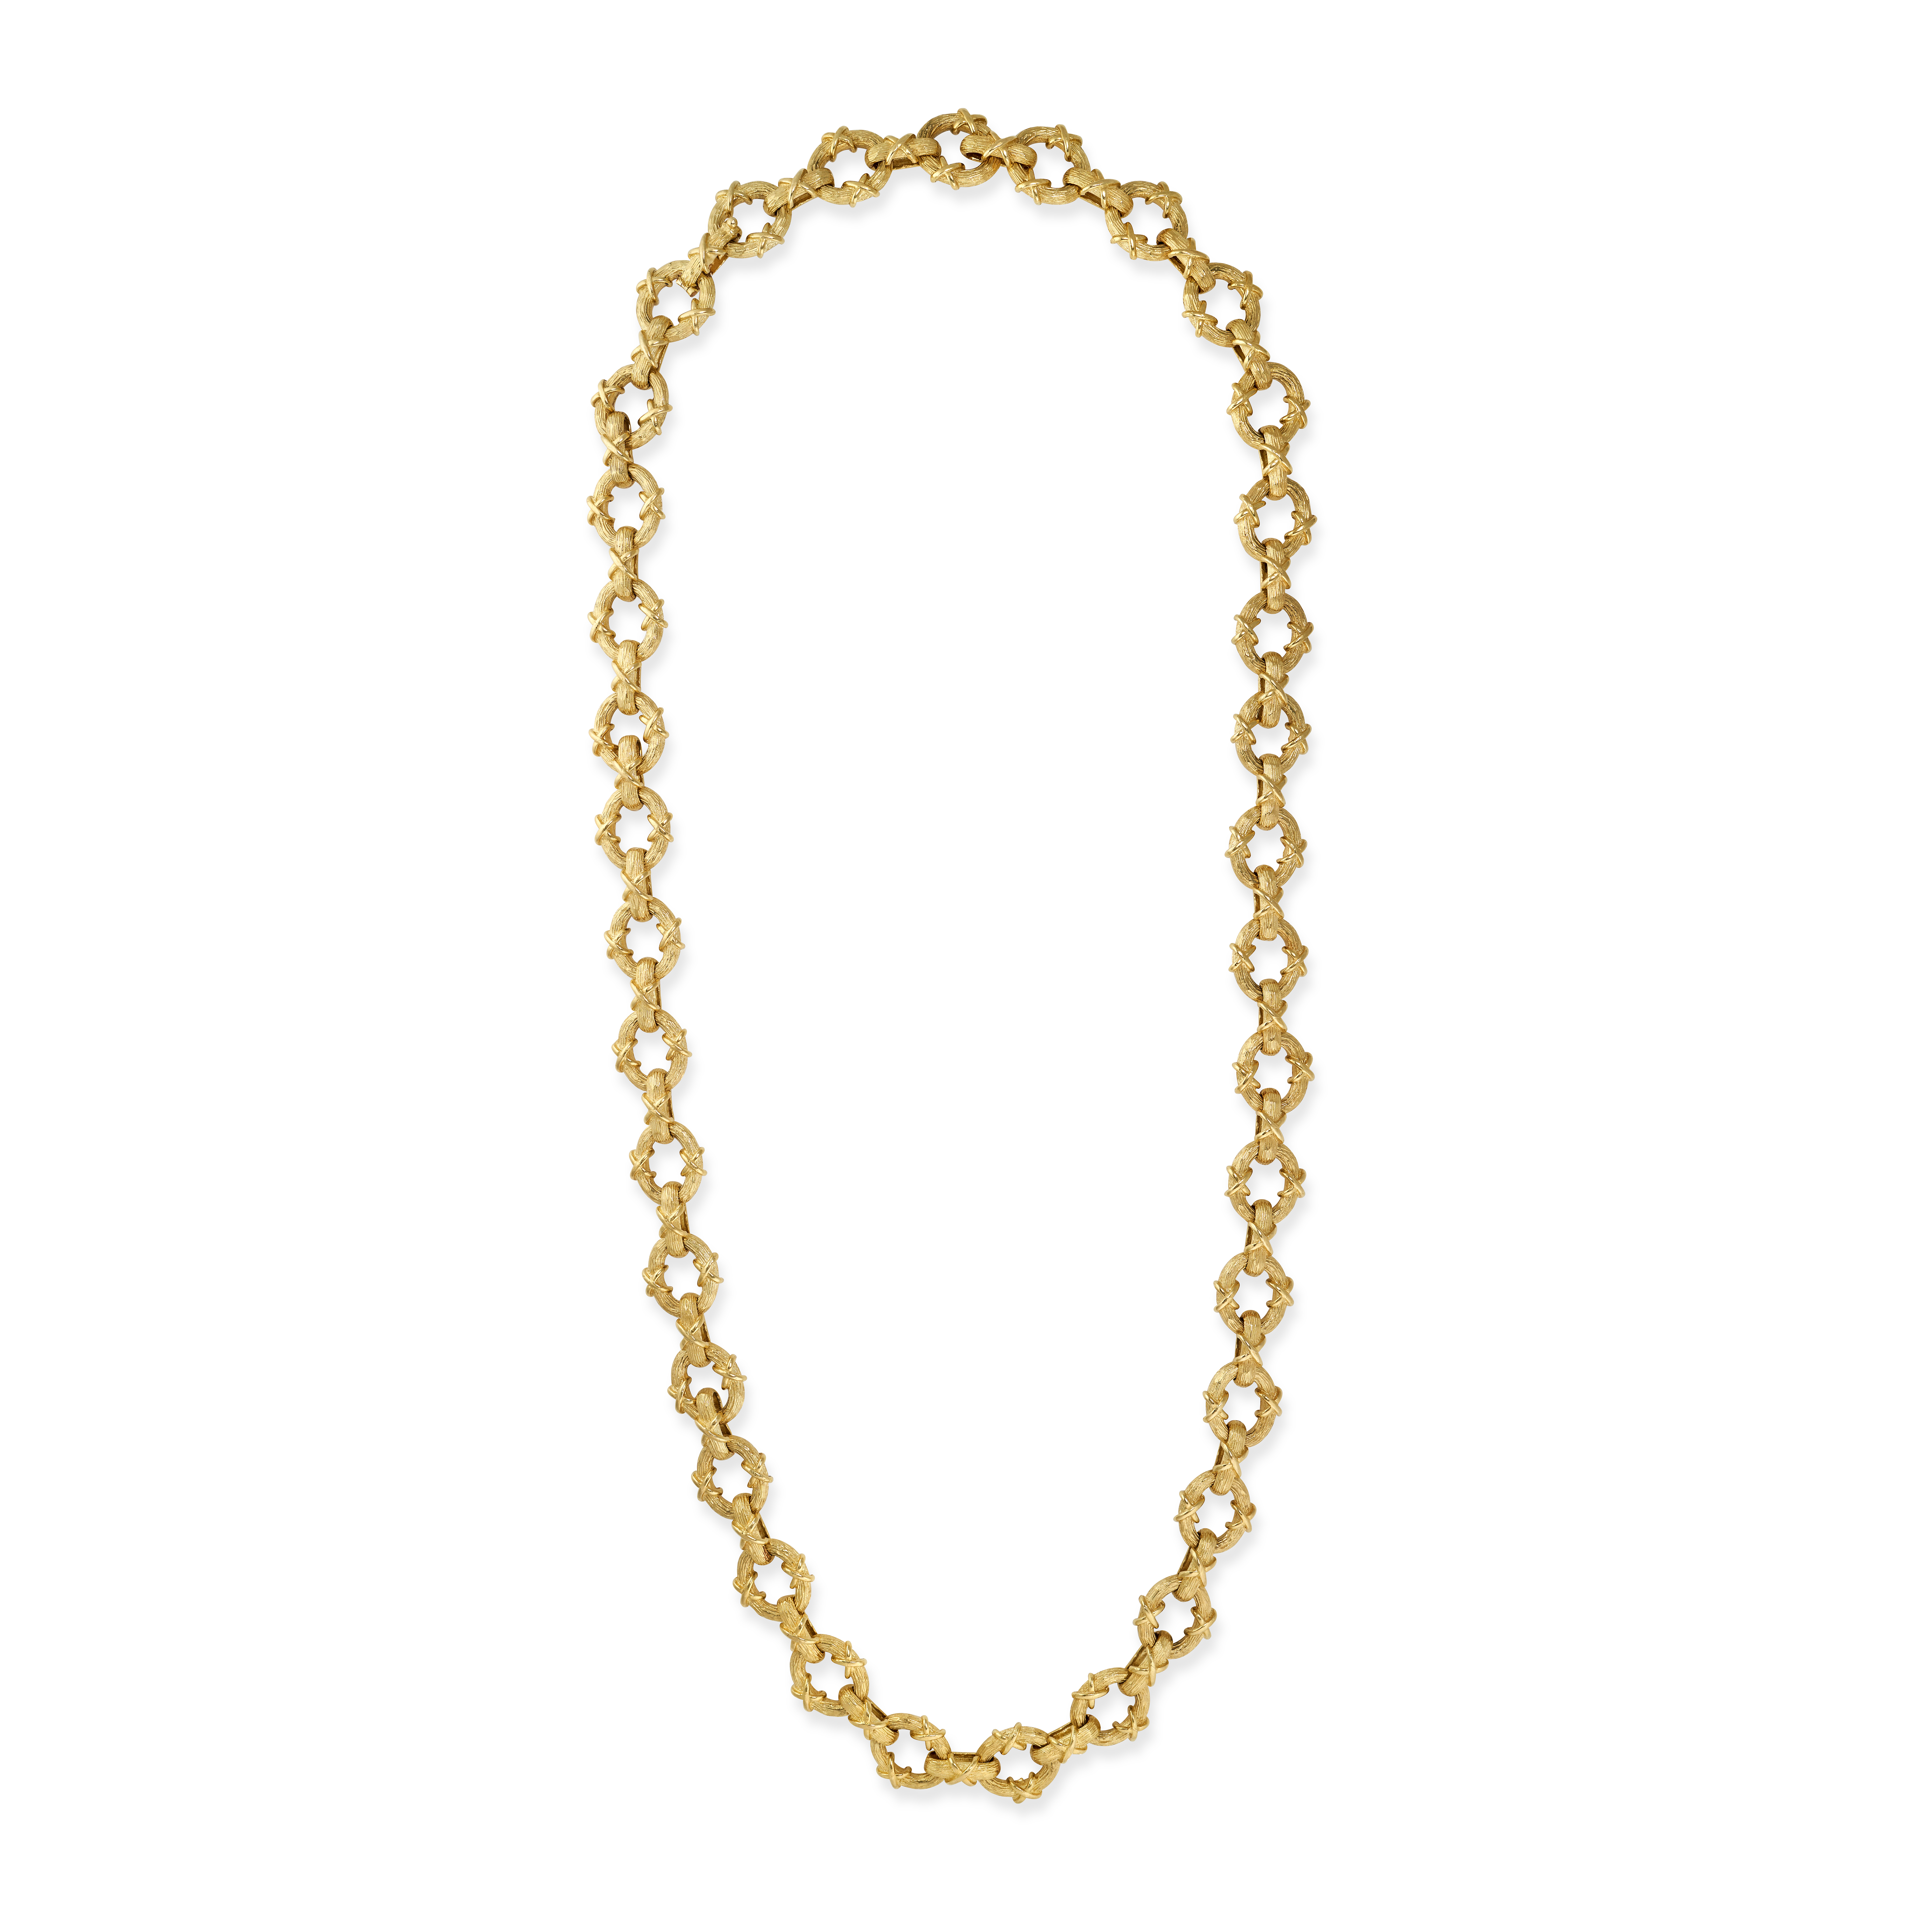 JEAN SCHLUMBERGER FOR TIFFANY & CO., A GOLD NECKLACE comprising a row of open circular links acce...